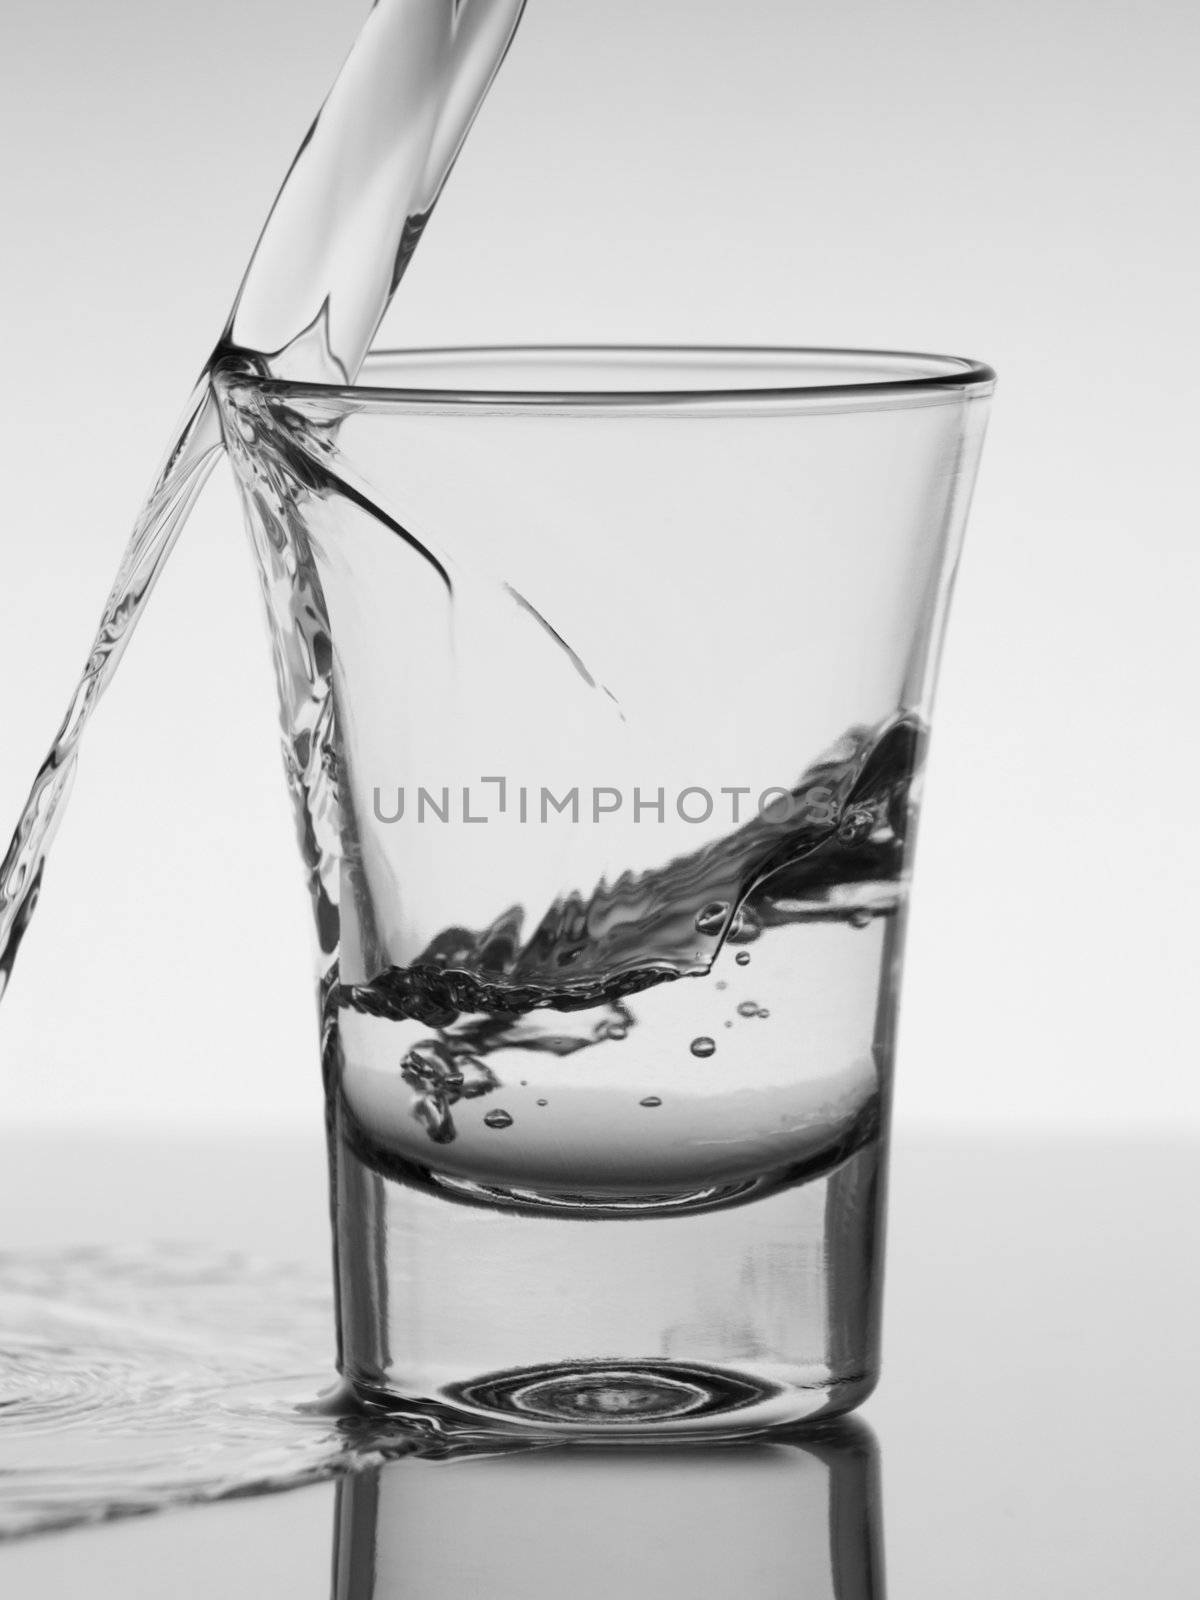 Pouring a shot of vodka. A conceptual image about the risk of  drinking excessively.